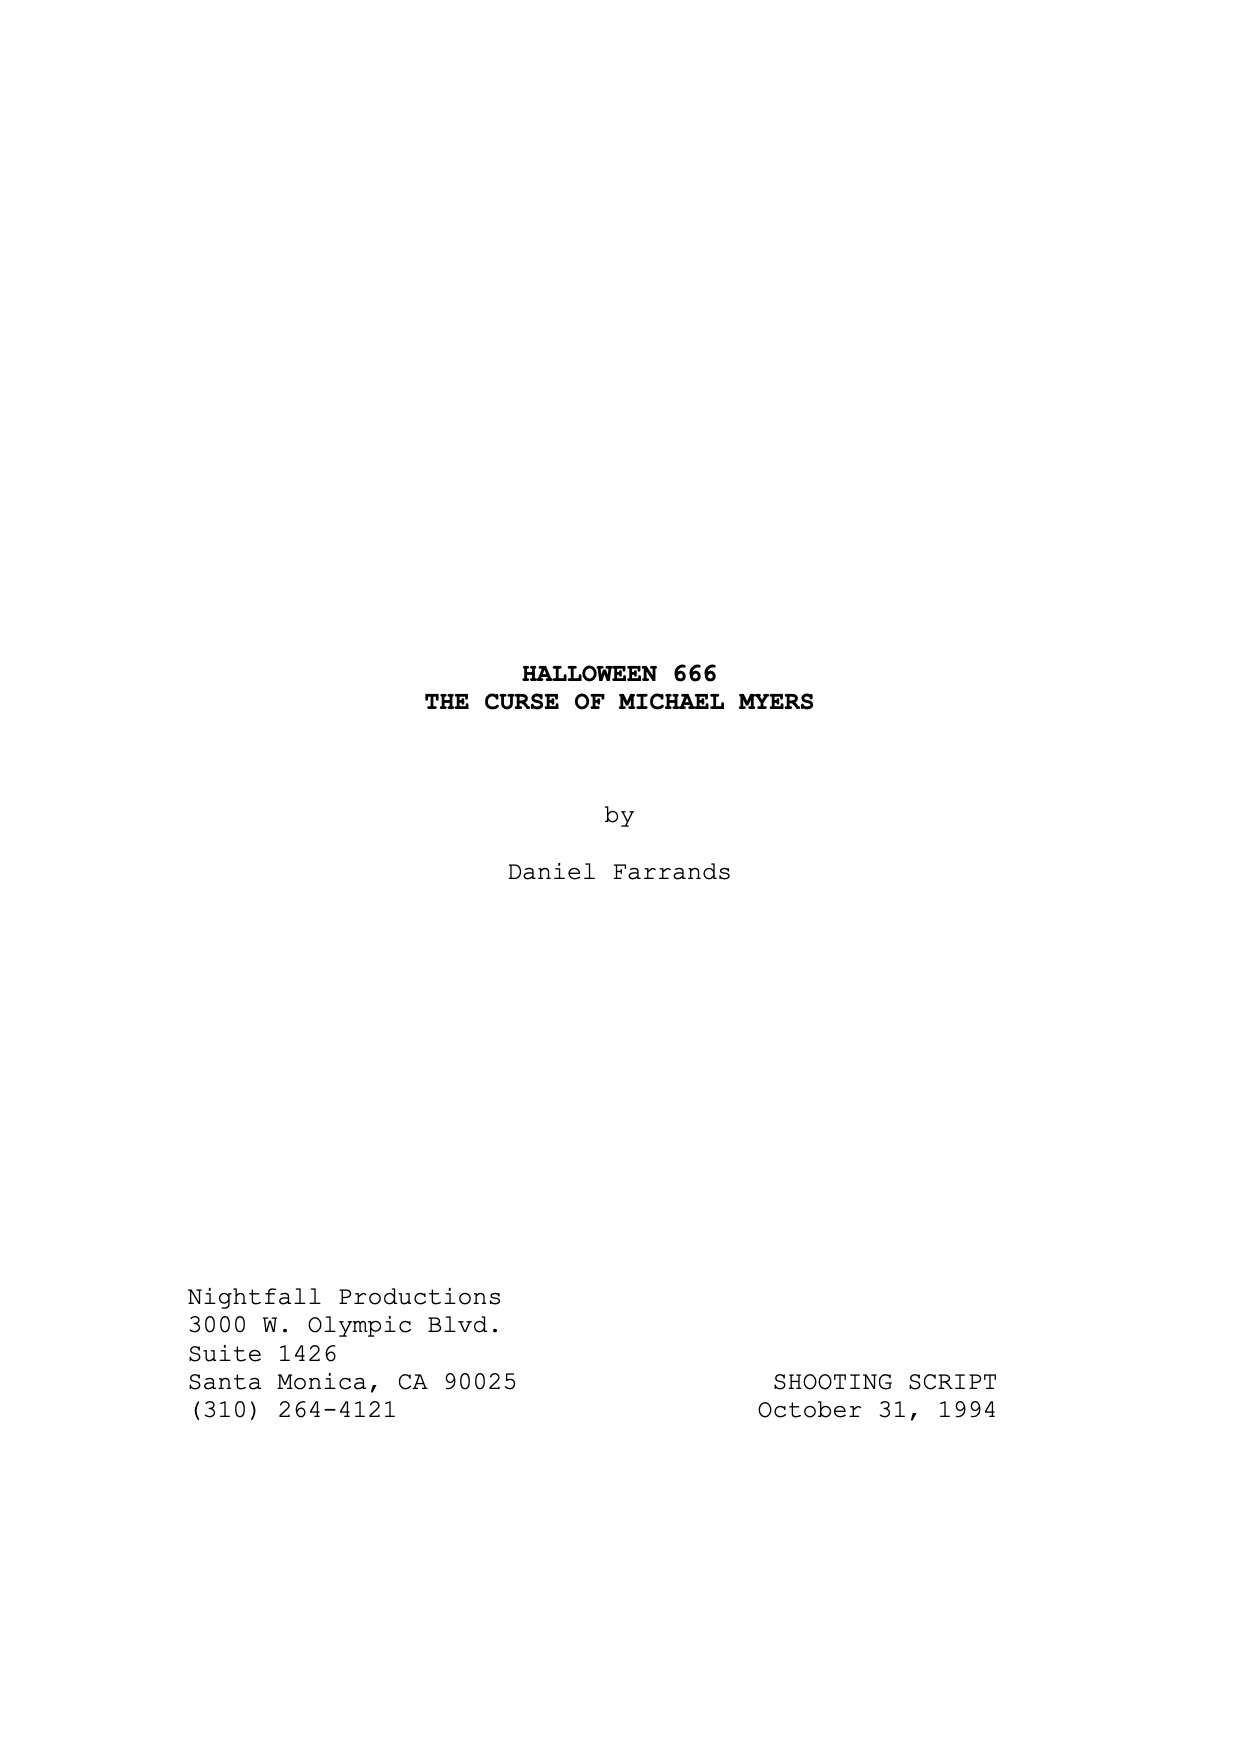 Halloween: The Curse of Michael Myers - Shooting Script